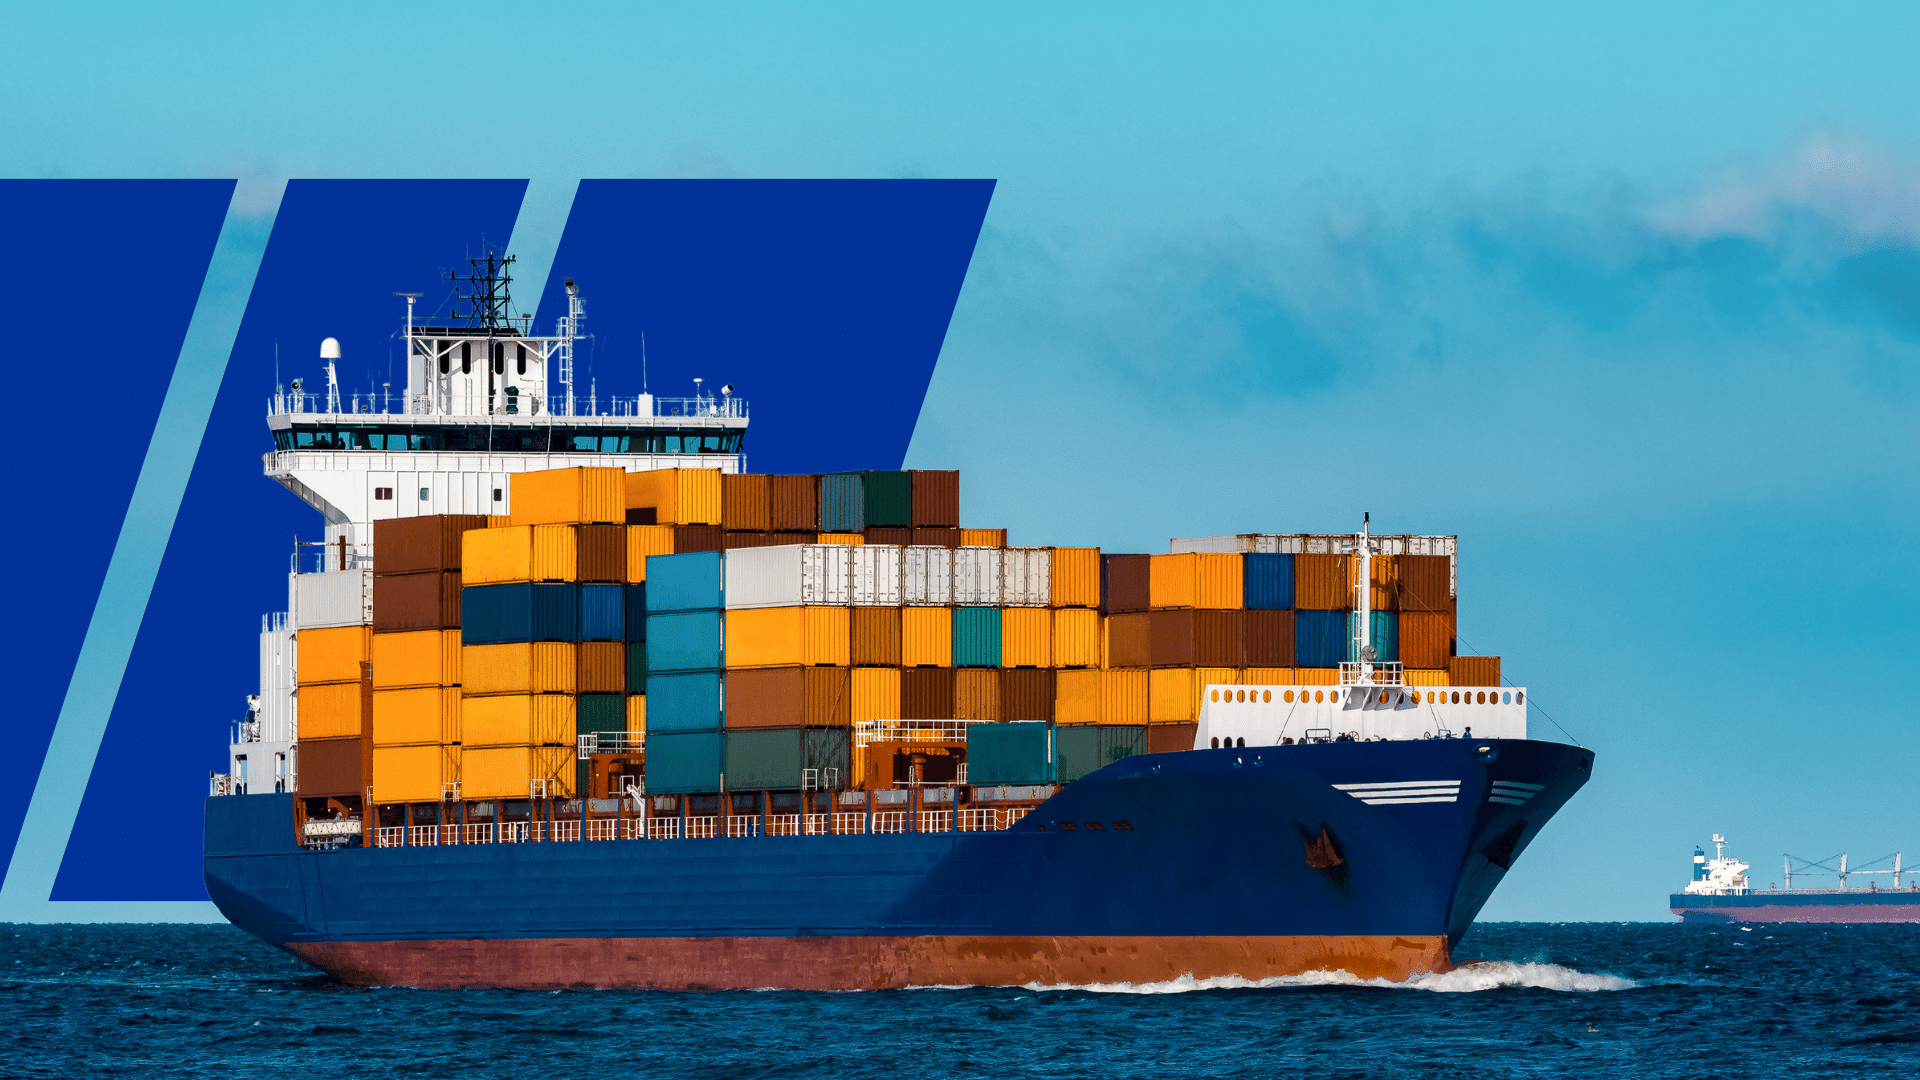 A cargo vessel transporting various goods across the world